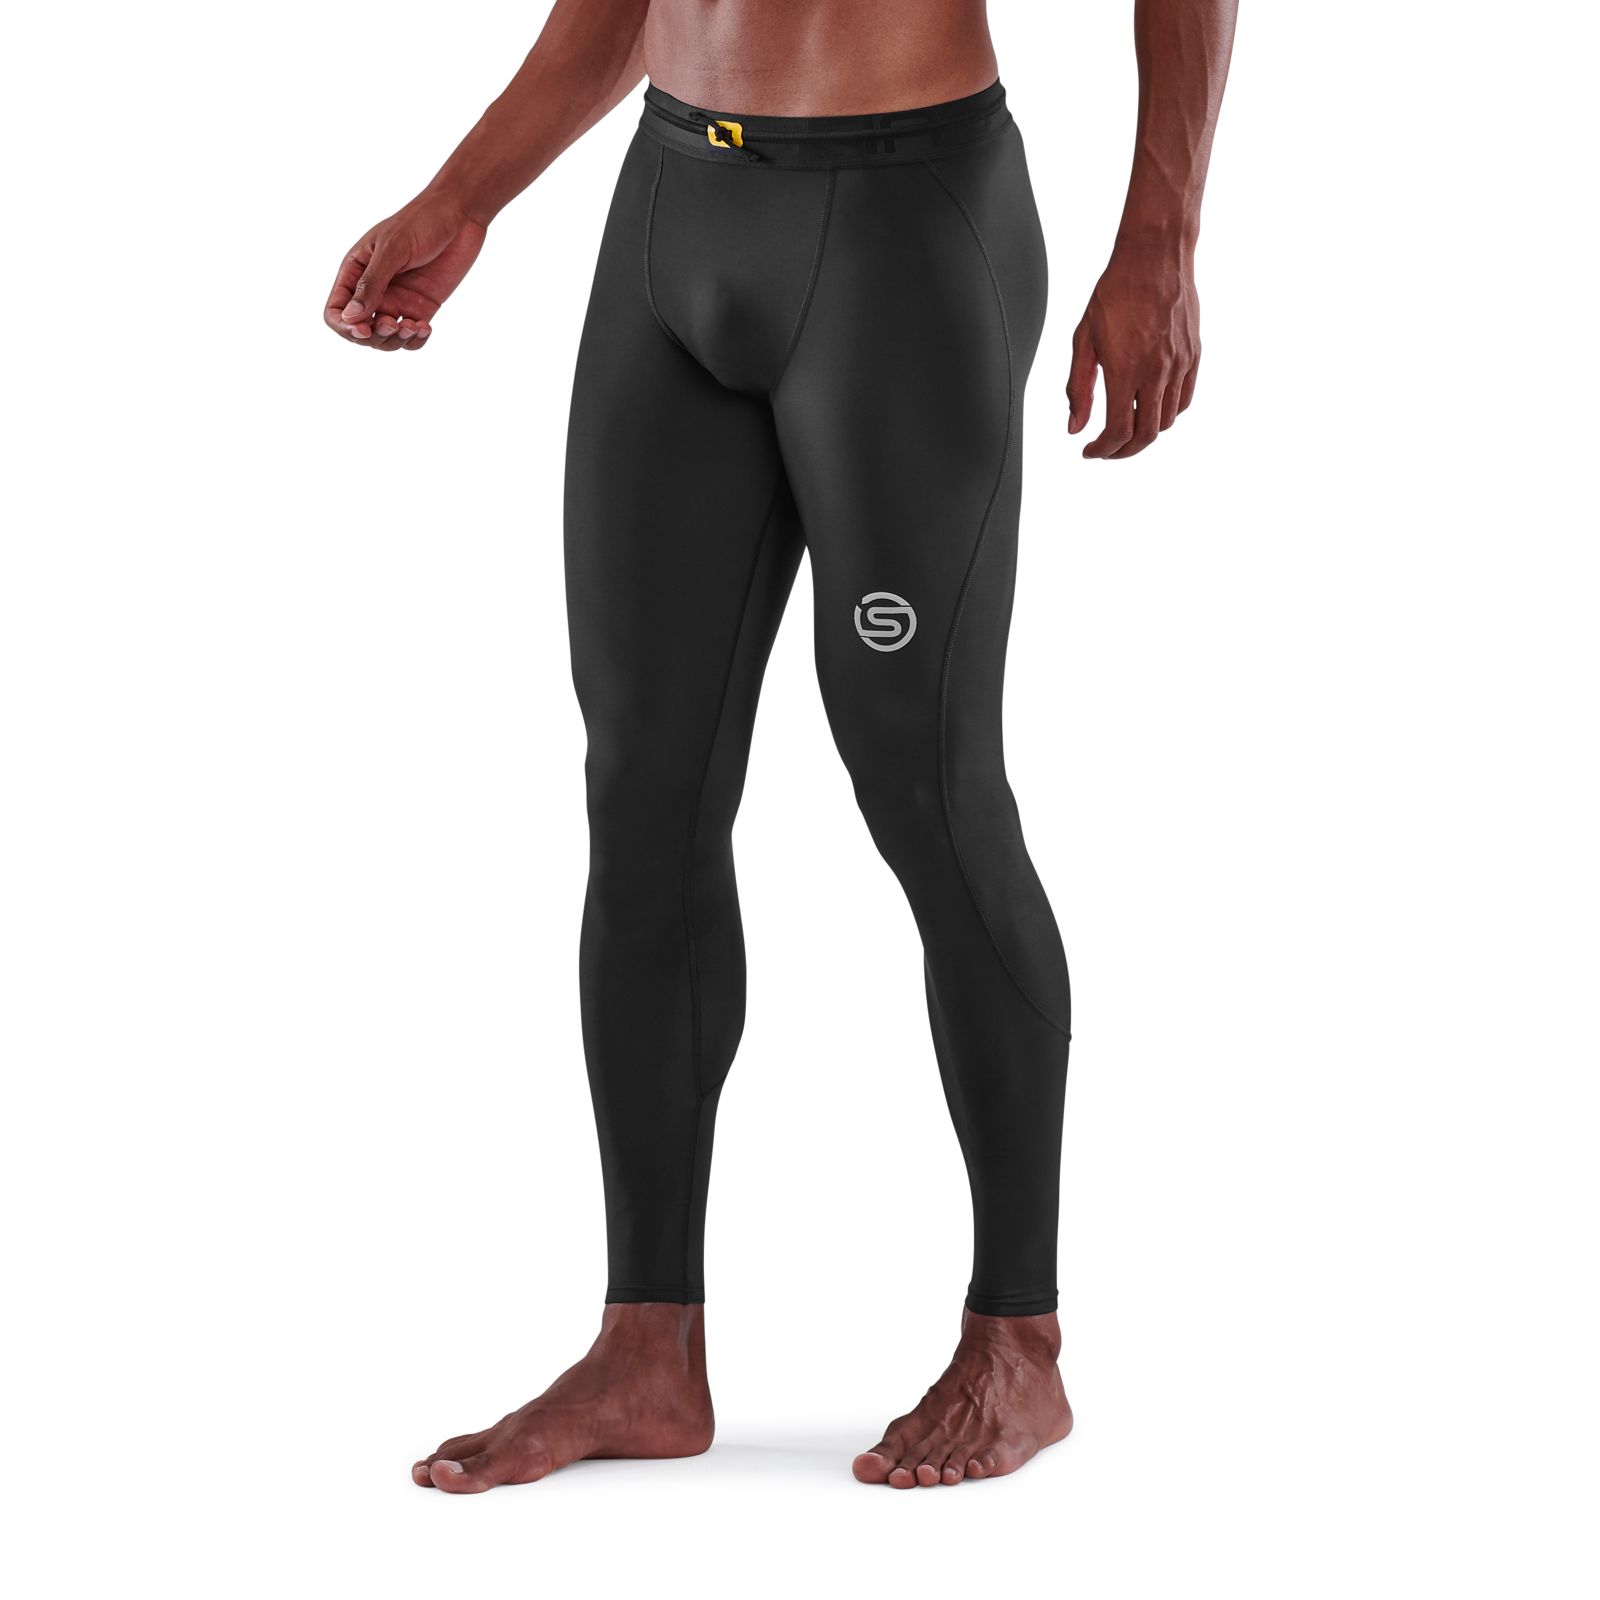 SKINS SERIES-3 MEN\'S TRAVEL AND LONG RECOVERY USA - SKINS BLACK Compression TIGHTS